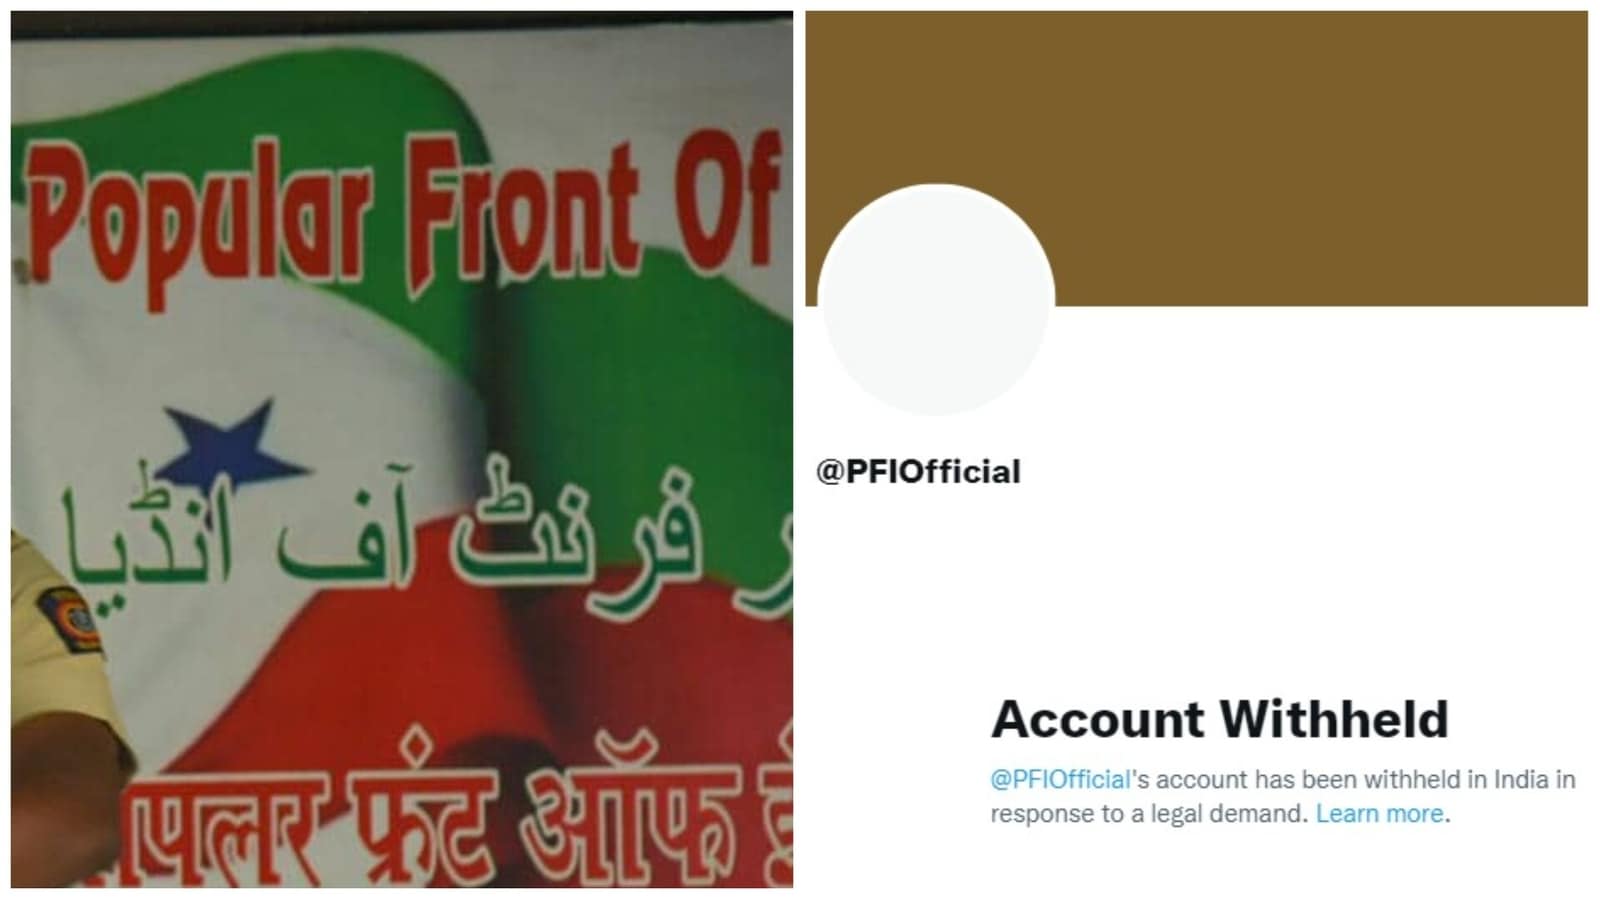 Twitter account of Popular Front of India withheld in India